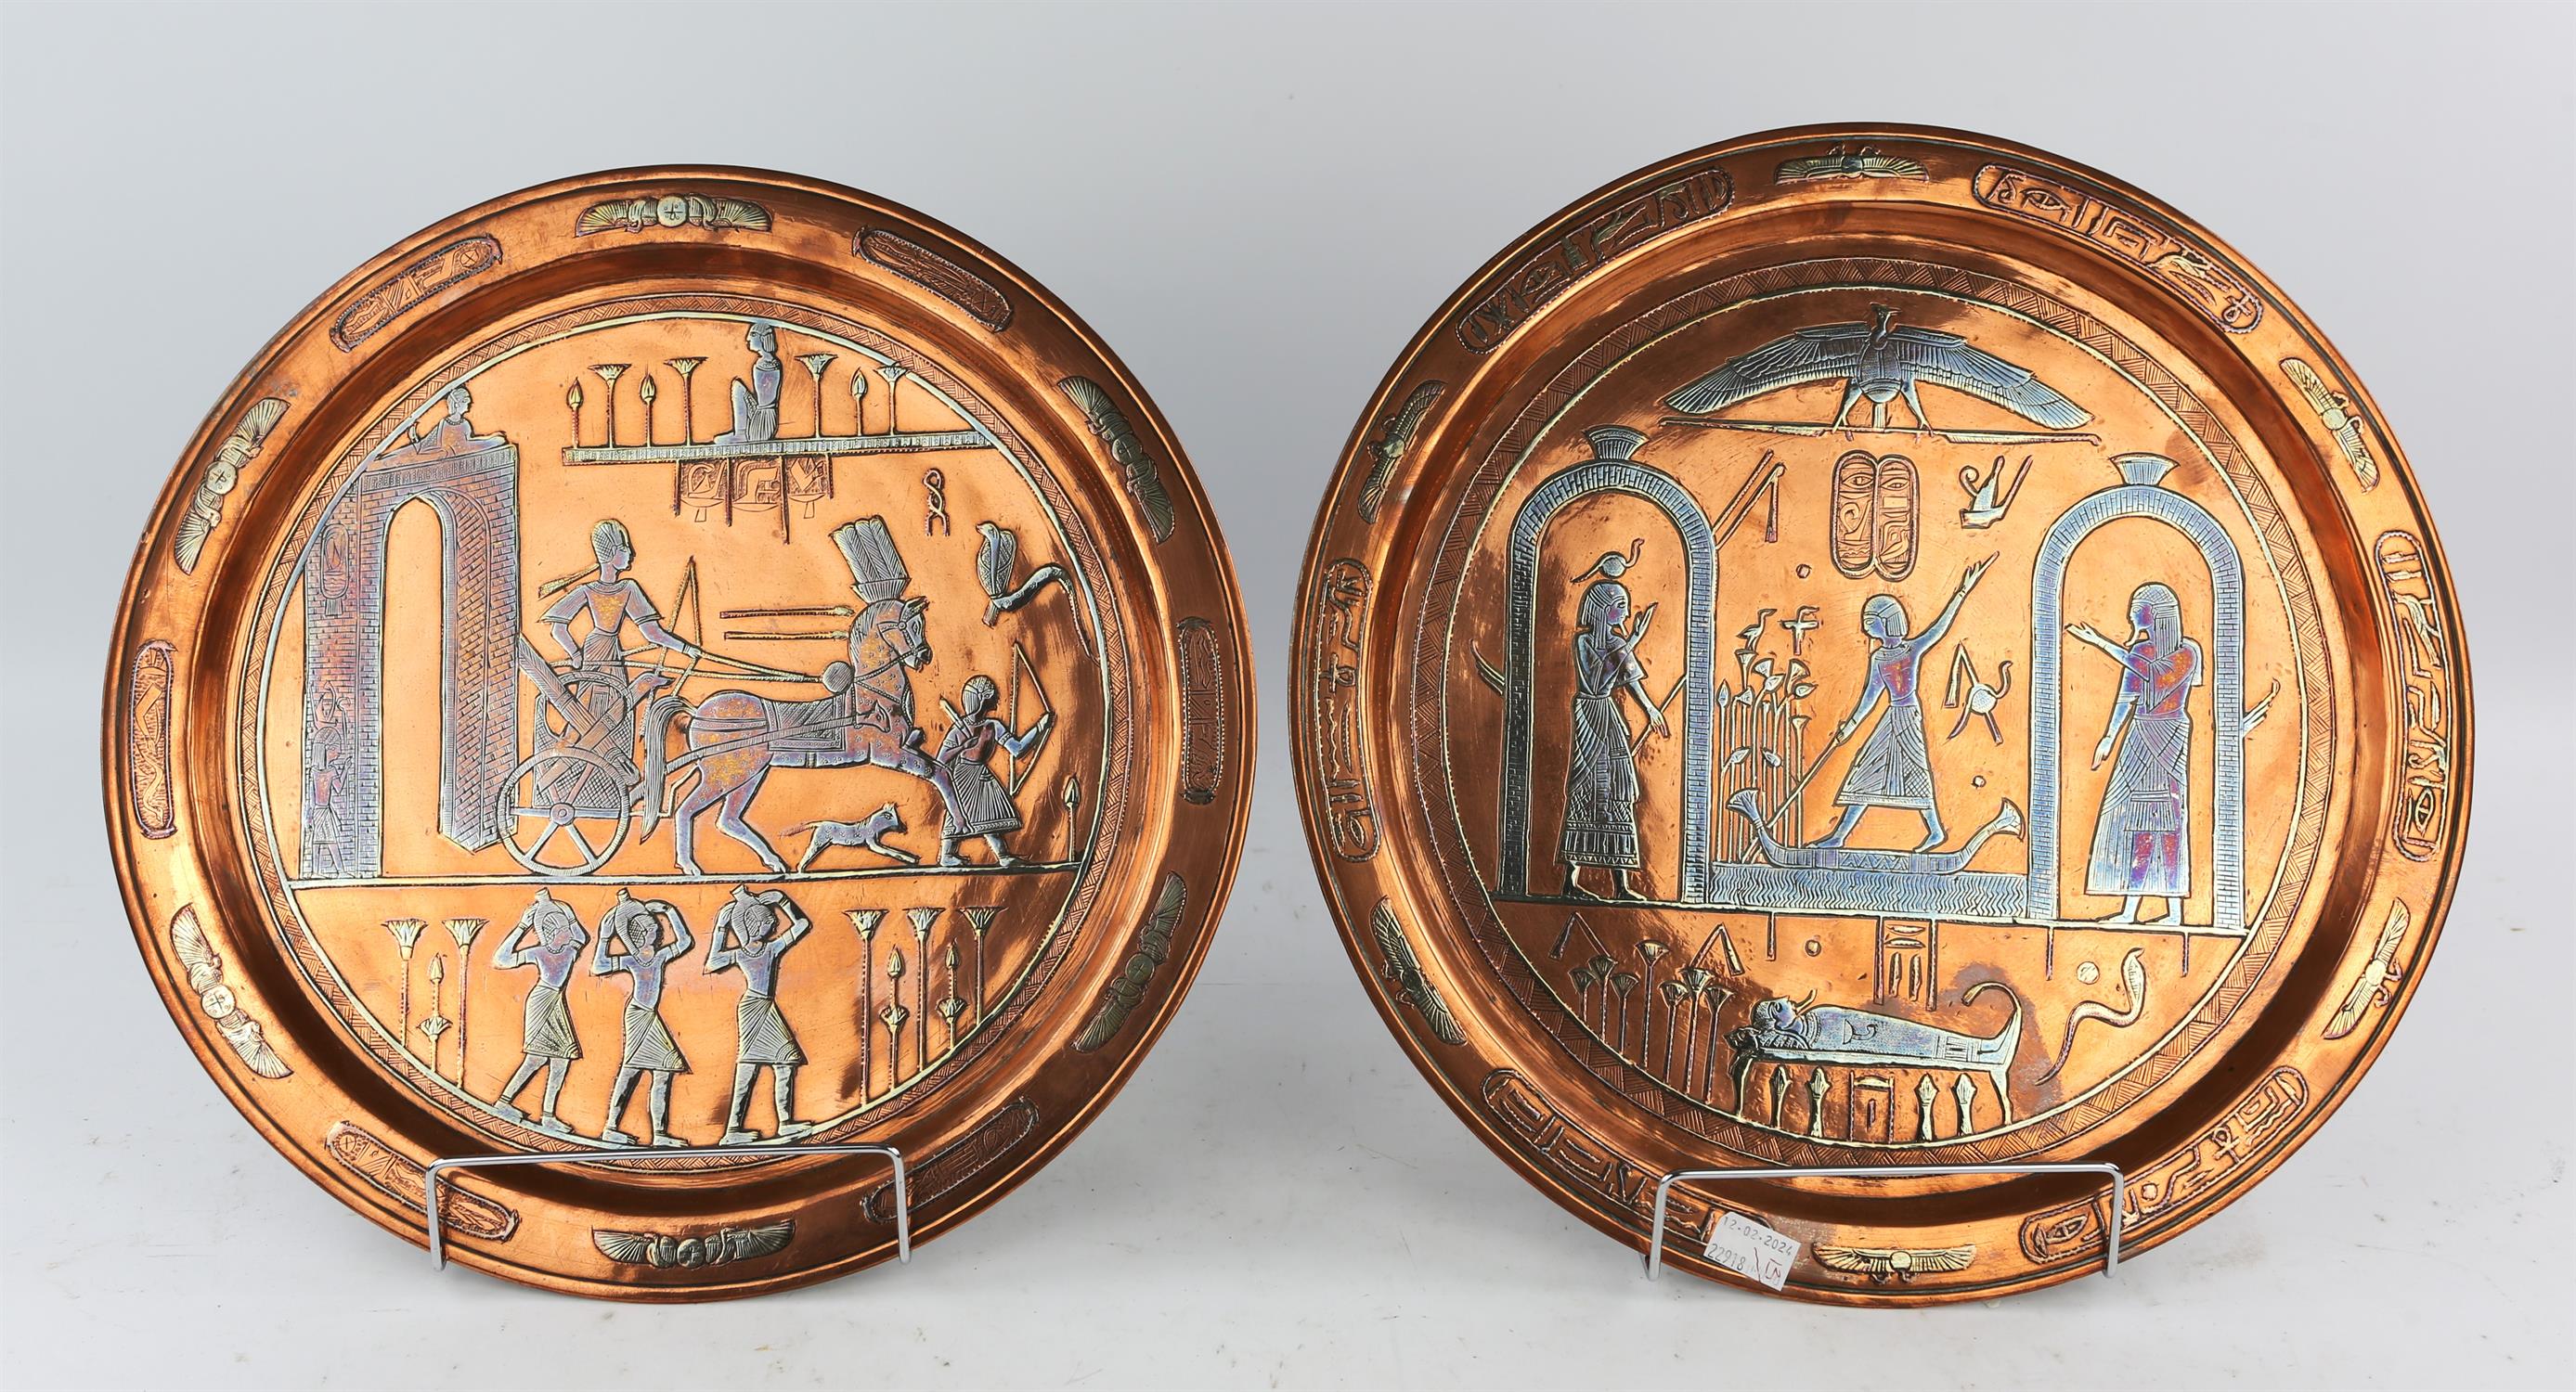 Two Egyptian copper and white metal souvenir plates, depicting scenes of a pharaoh riding a chariot